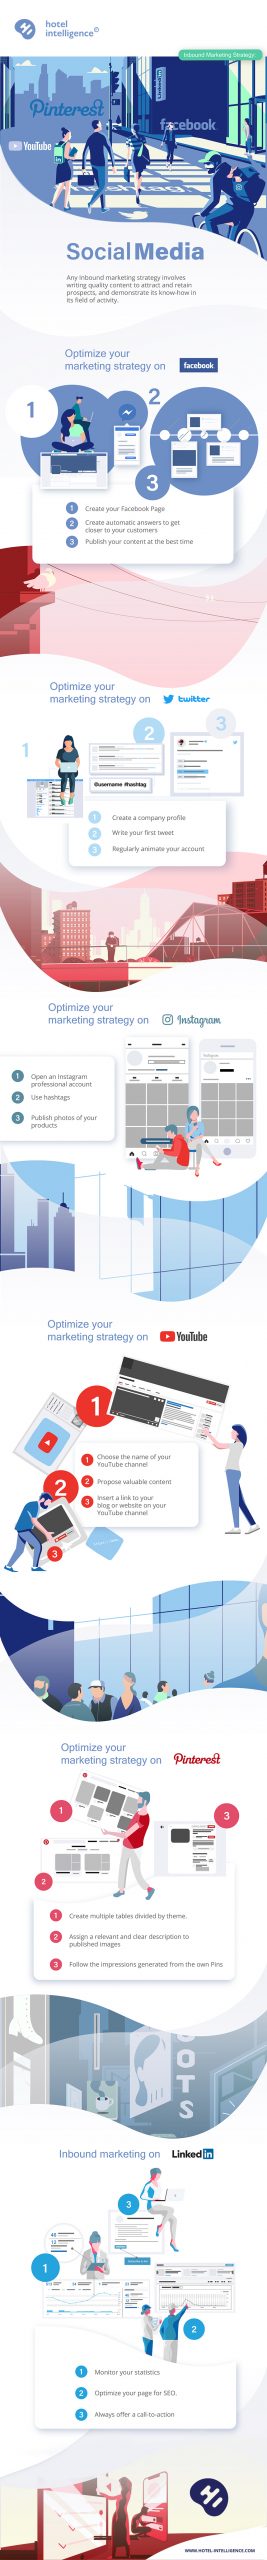  Tips To Optimize Your Social Media Strategy